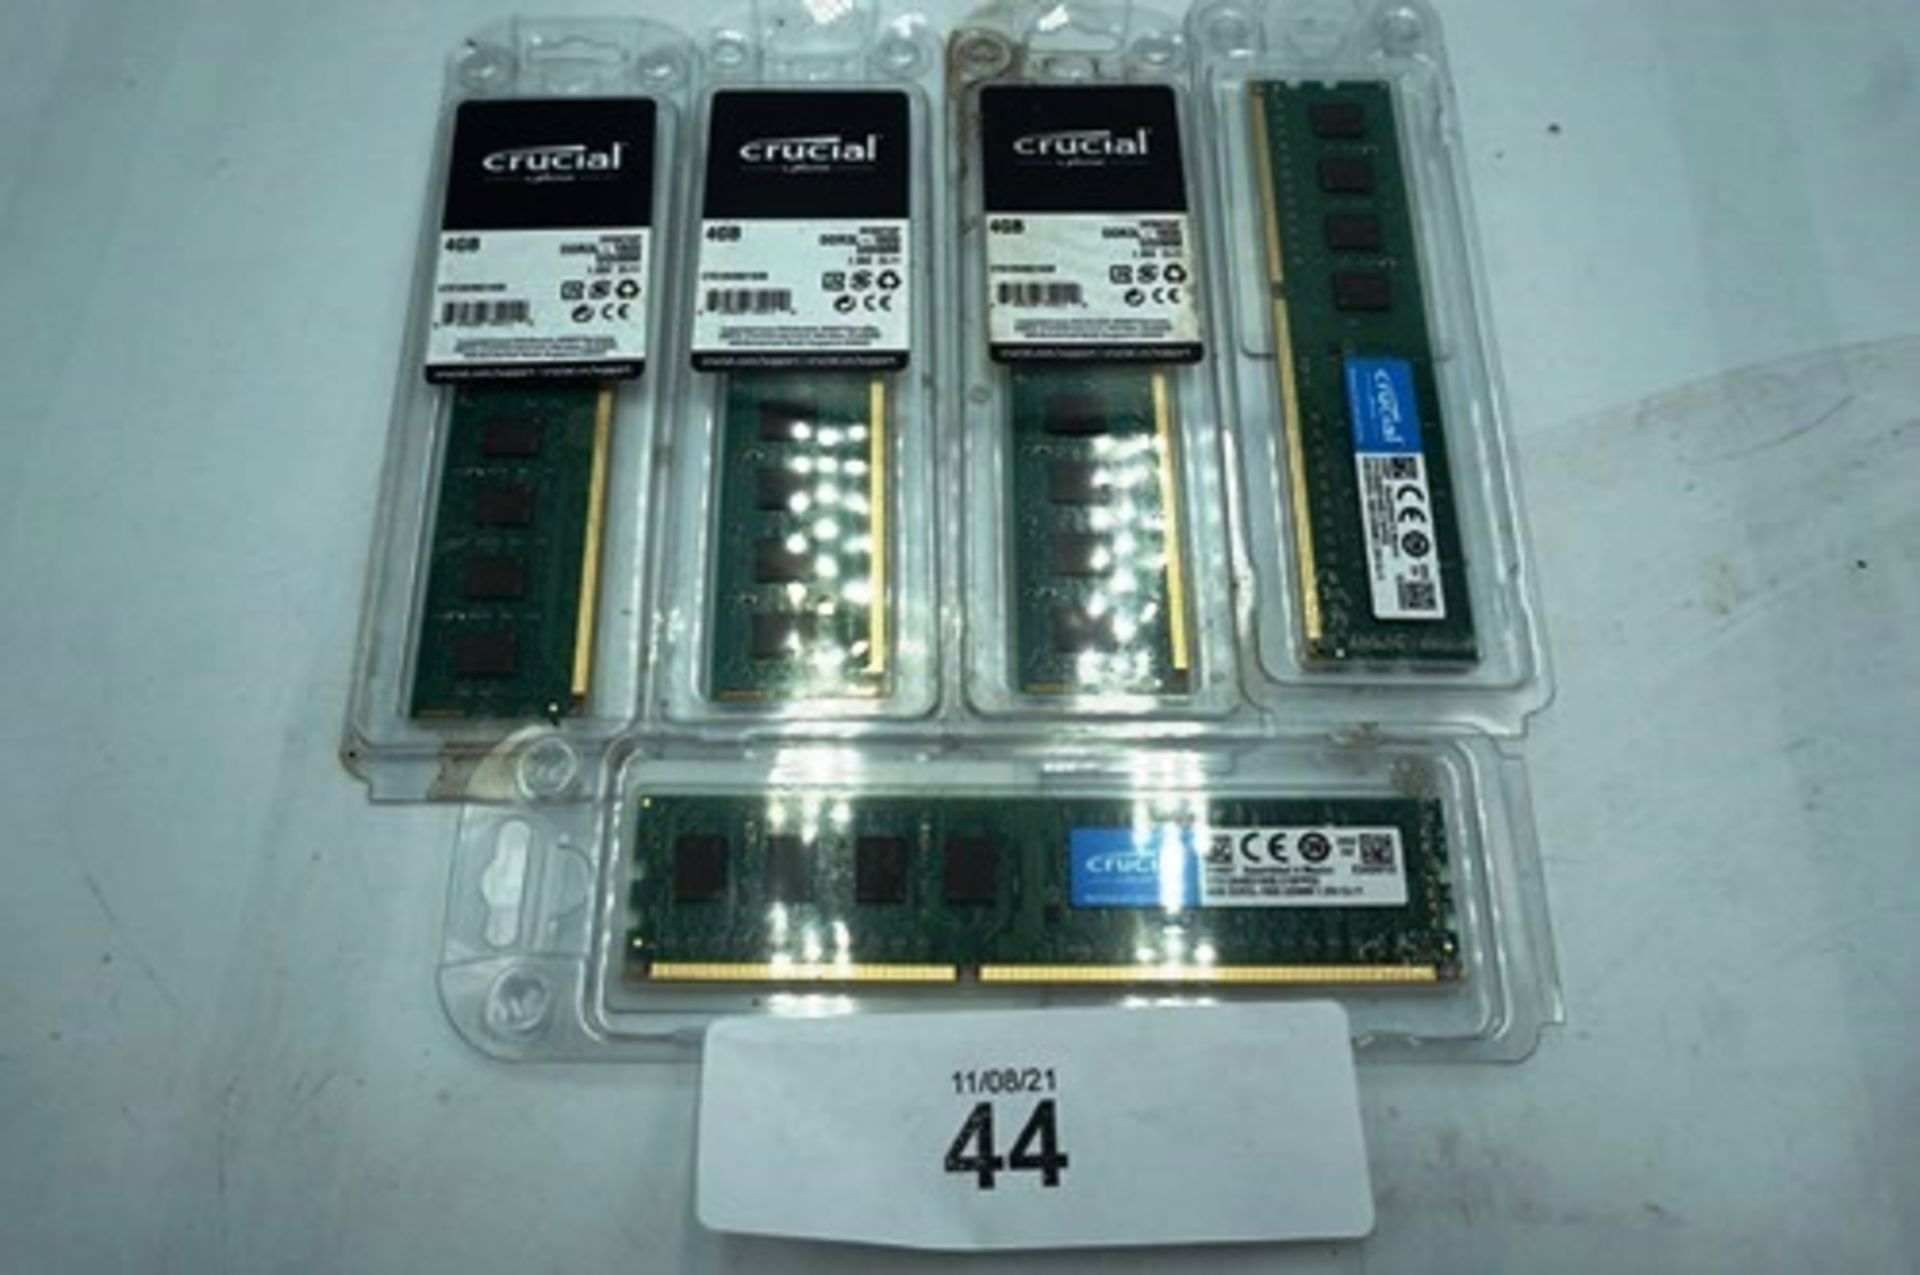 5 x Crucial 4gb DDR3L-1600 UDIMM memory modules, model CT51264BD160B - Sealed new in pack (C1)